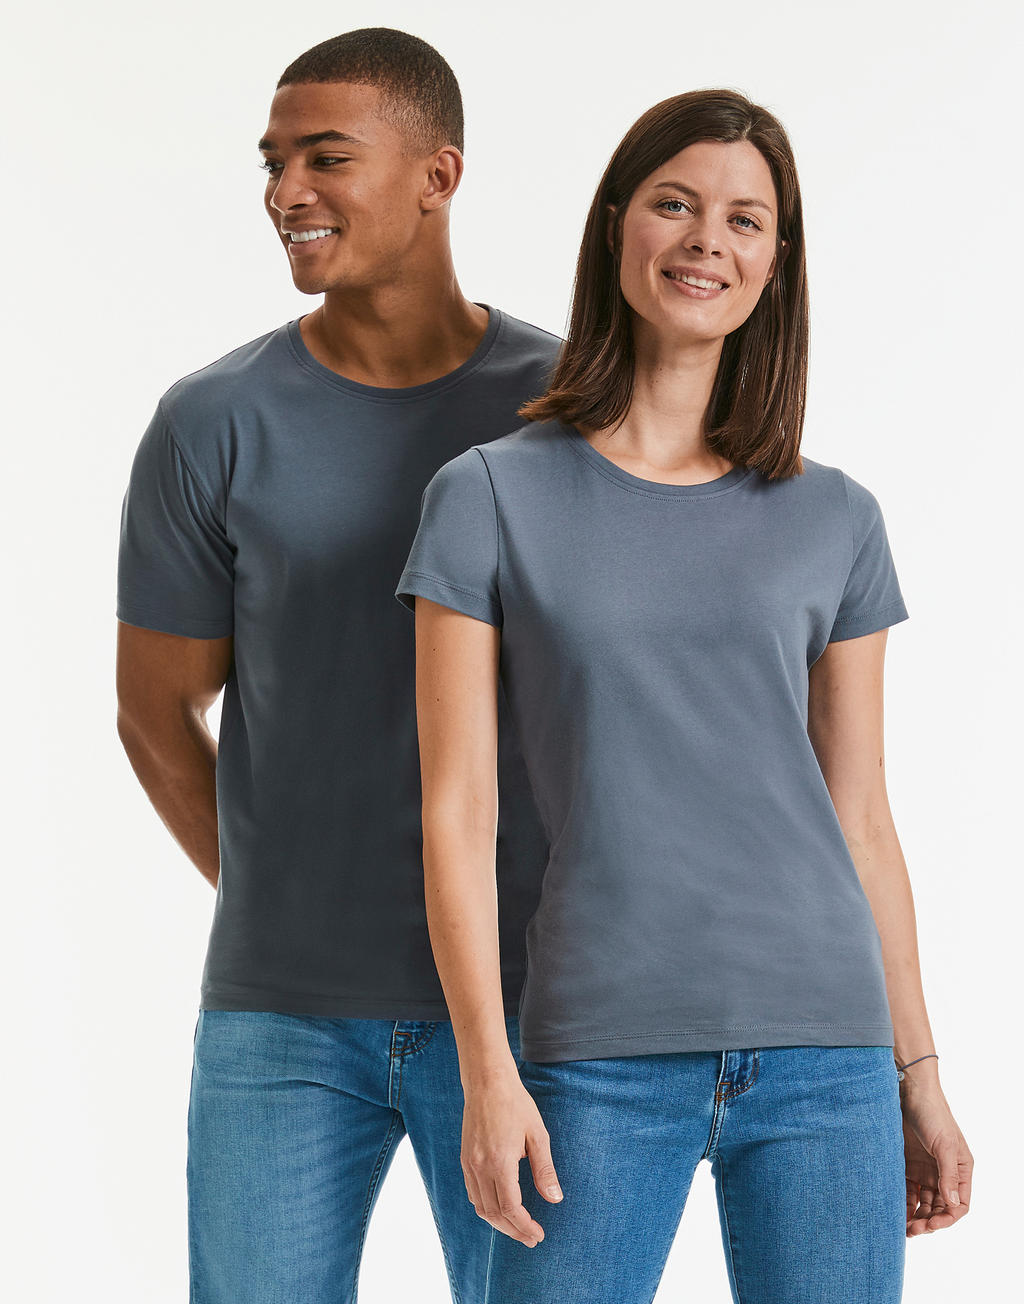  Ladies Pure Organic Heavy Tee in Farbe White